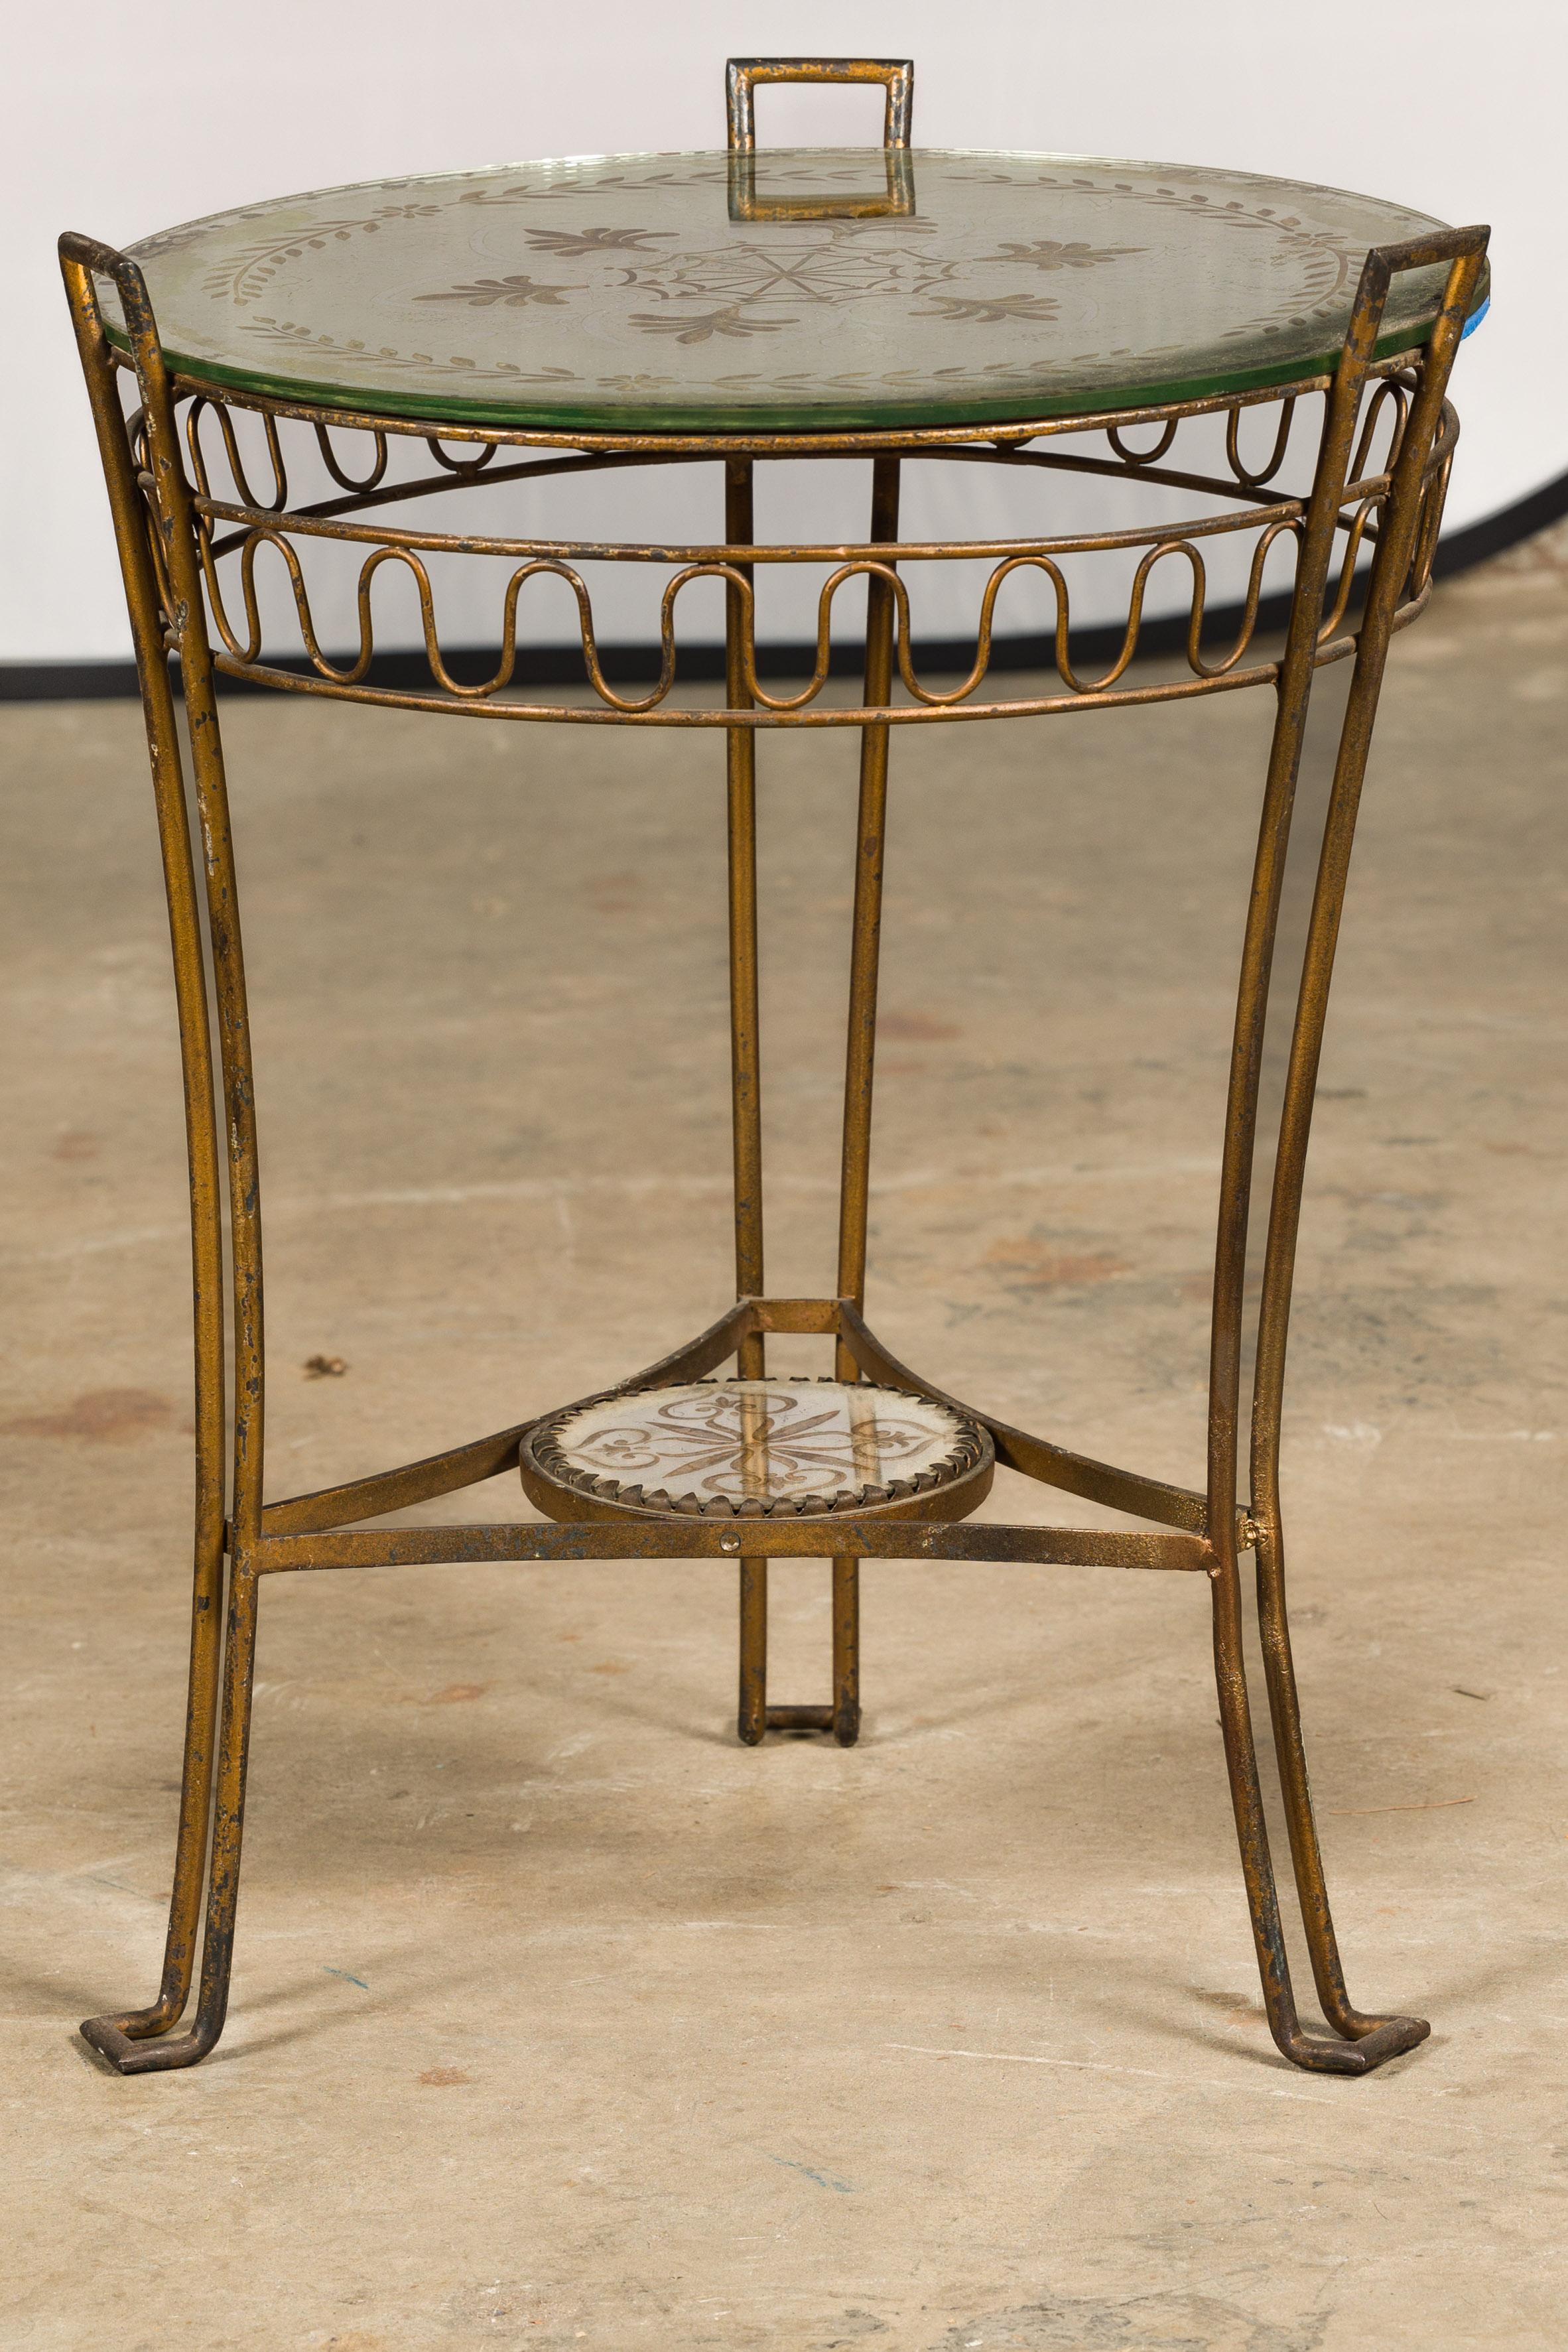 French 1920s Gilt Iron Side Table with Etched Foliage Mirrored Top and Low Shelf For Sale 10